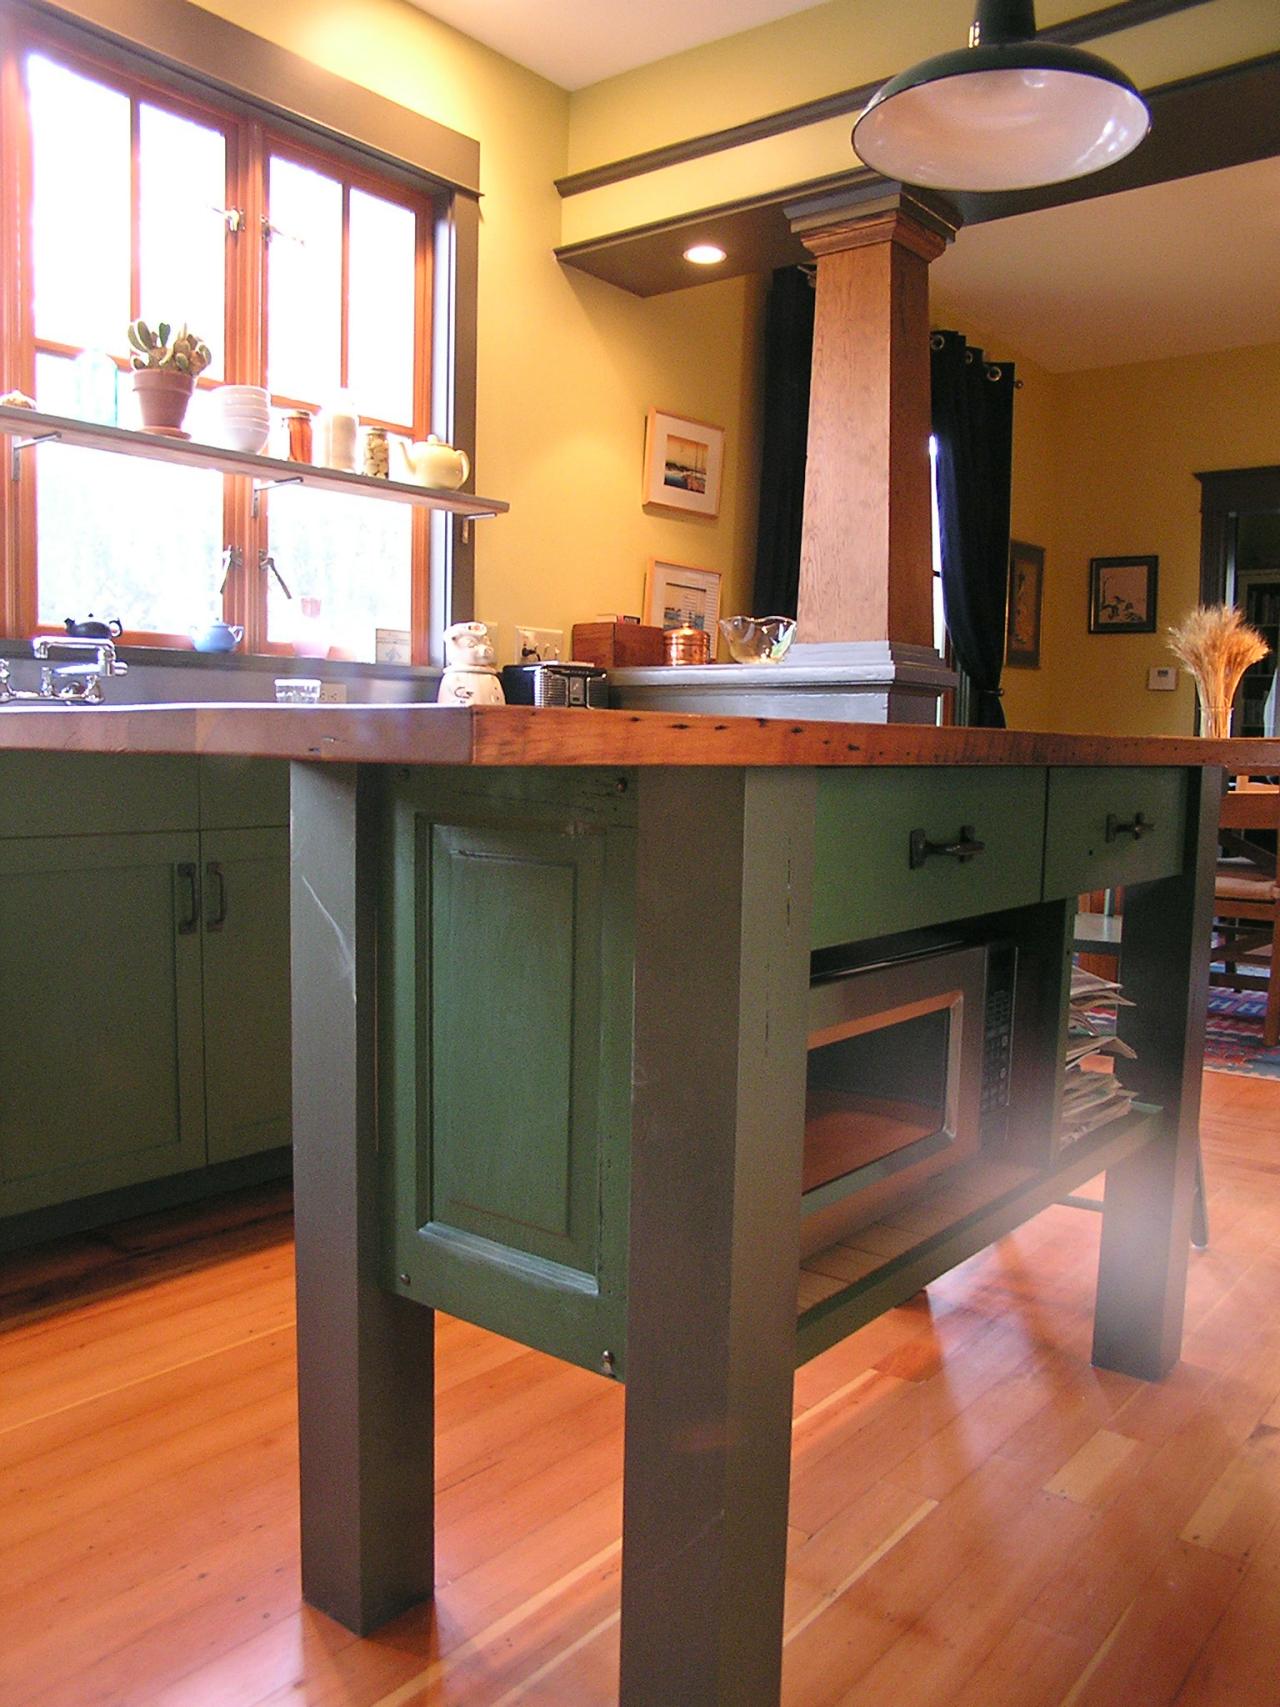 Remodeling Your Kitchen With Salvaged Items Diy